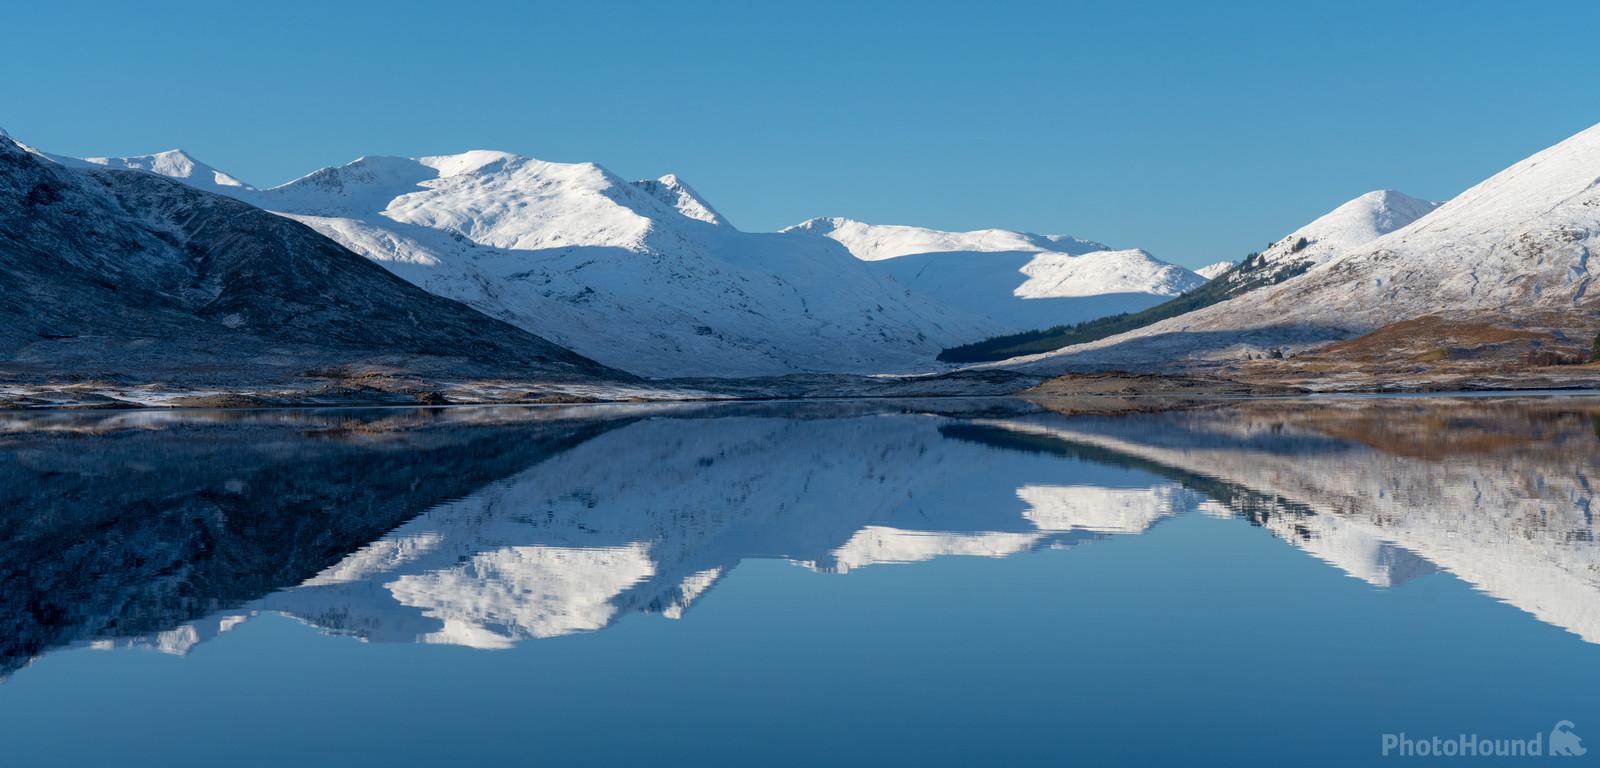 Image of Loch Cluanie by Richard Lizzimore